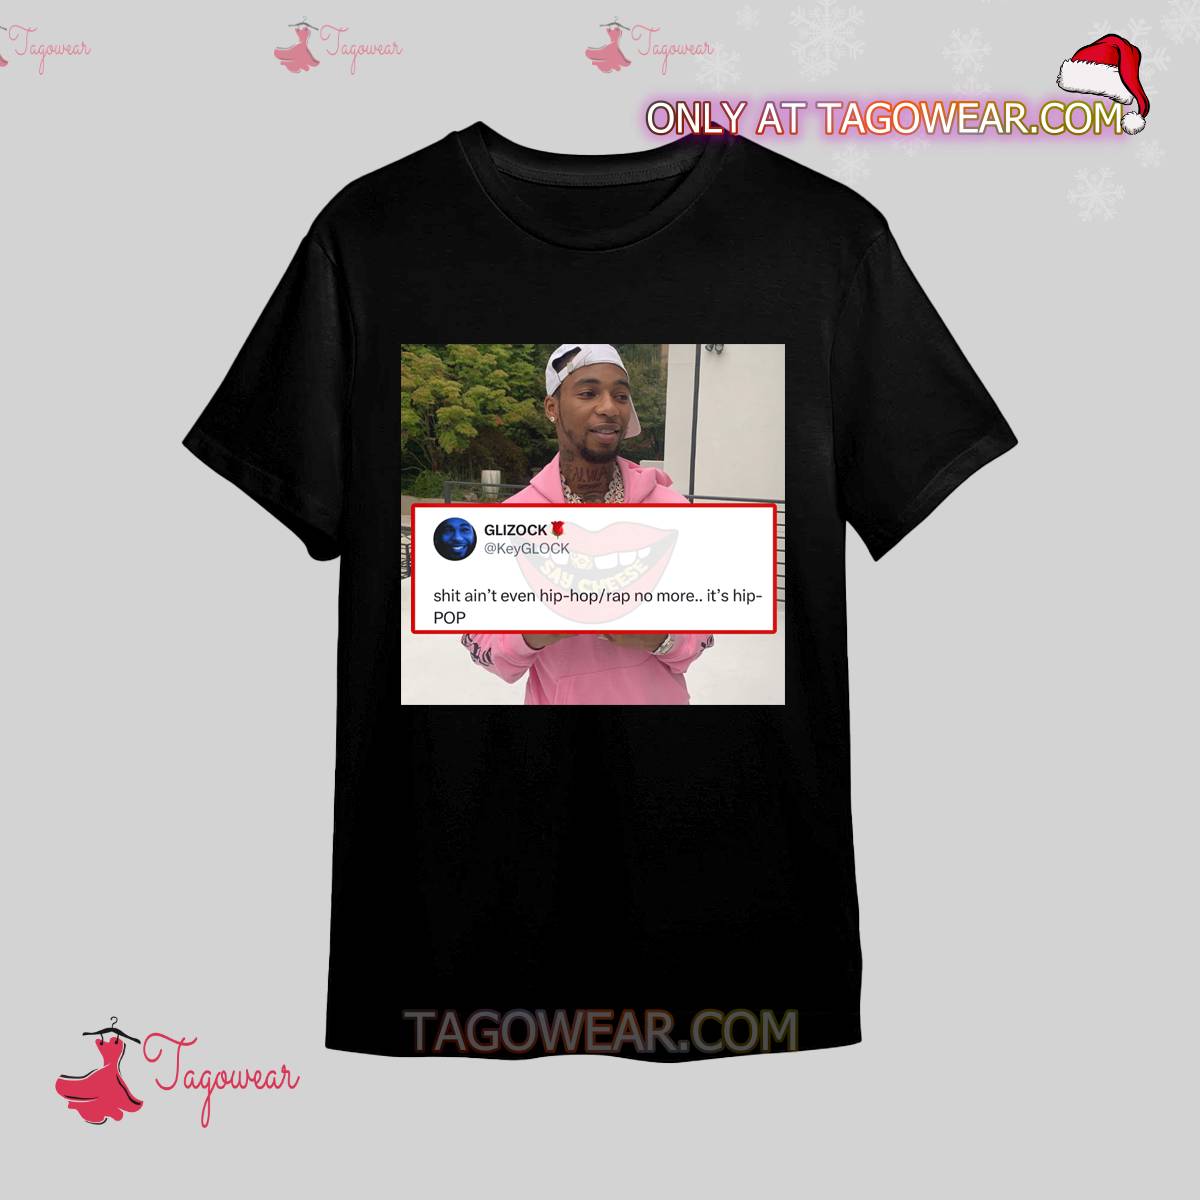 Key Glock Speaks On The Current State Of Hiphop Shirt